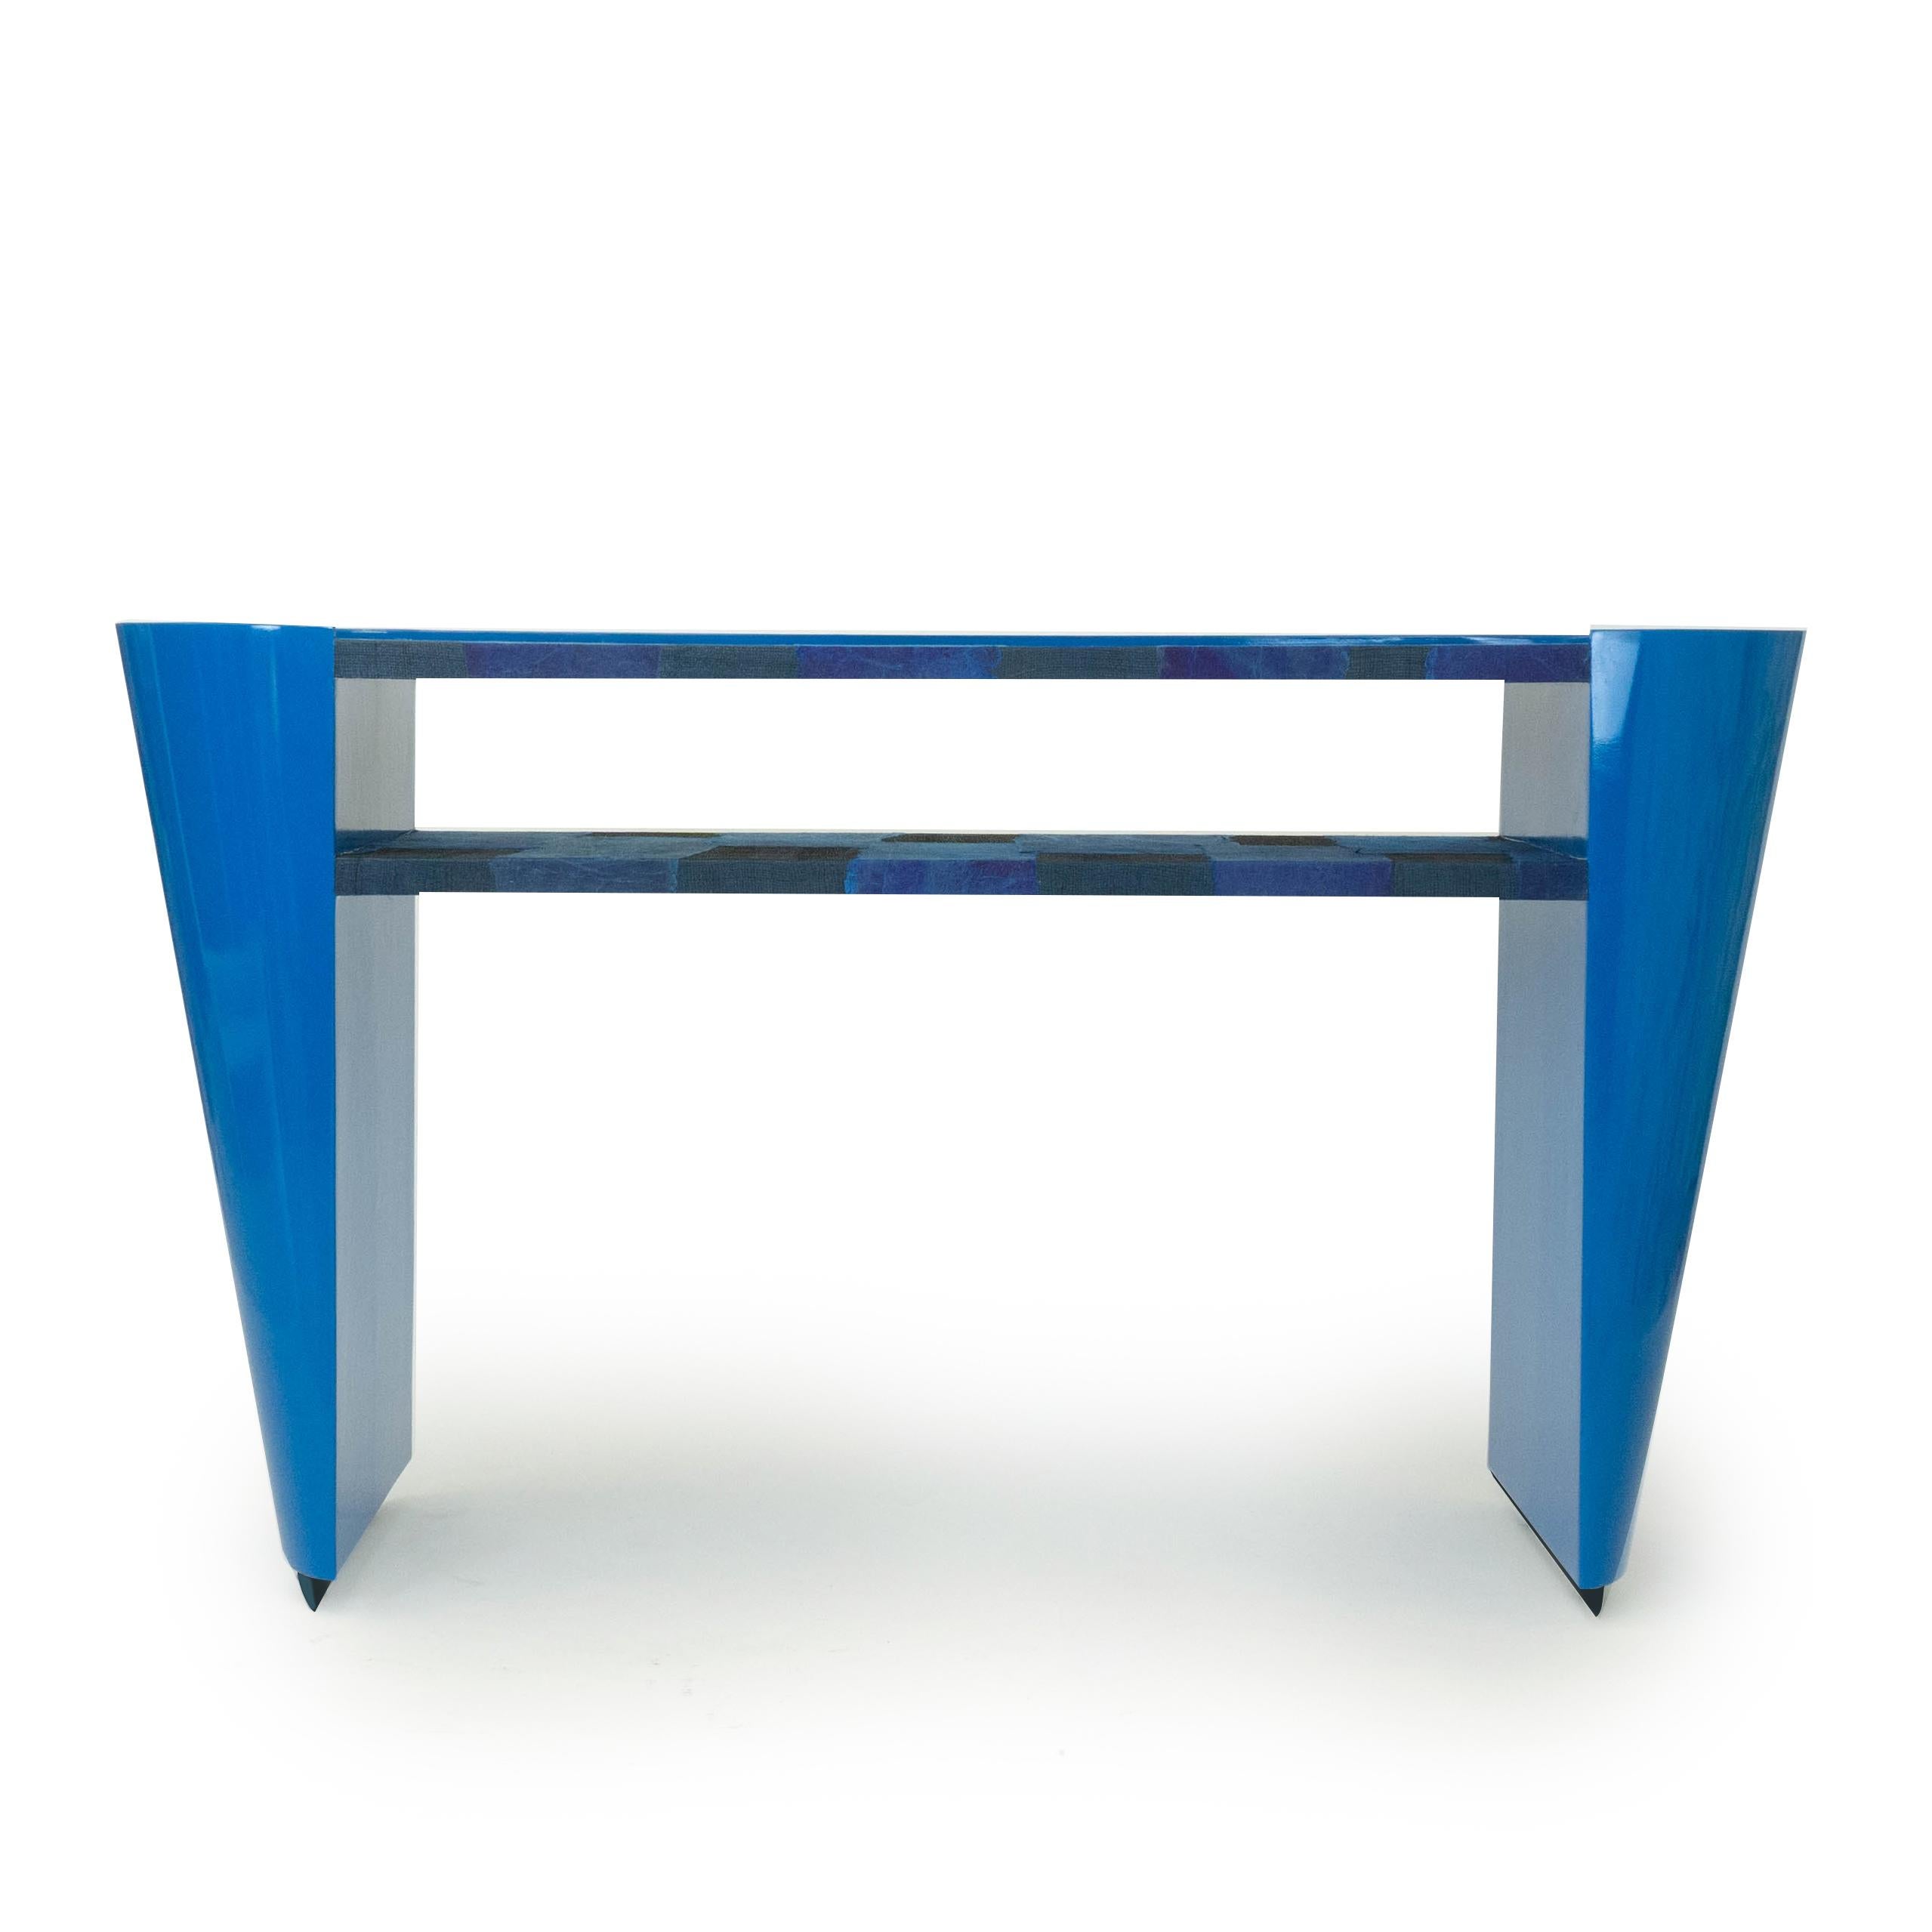 Our new modern Art Deco inspired console table is lacquered in laguna and marine blue. The table features a shelf and top covered in handmade woven raffias and pieces of paper. This piece is made with maple wood and designed with tapered, rounded